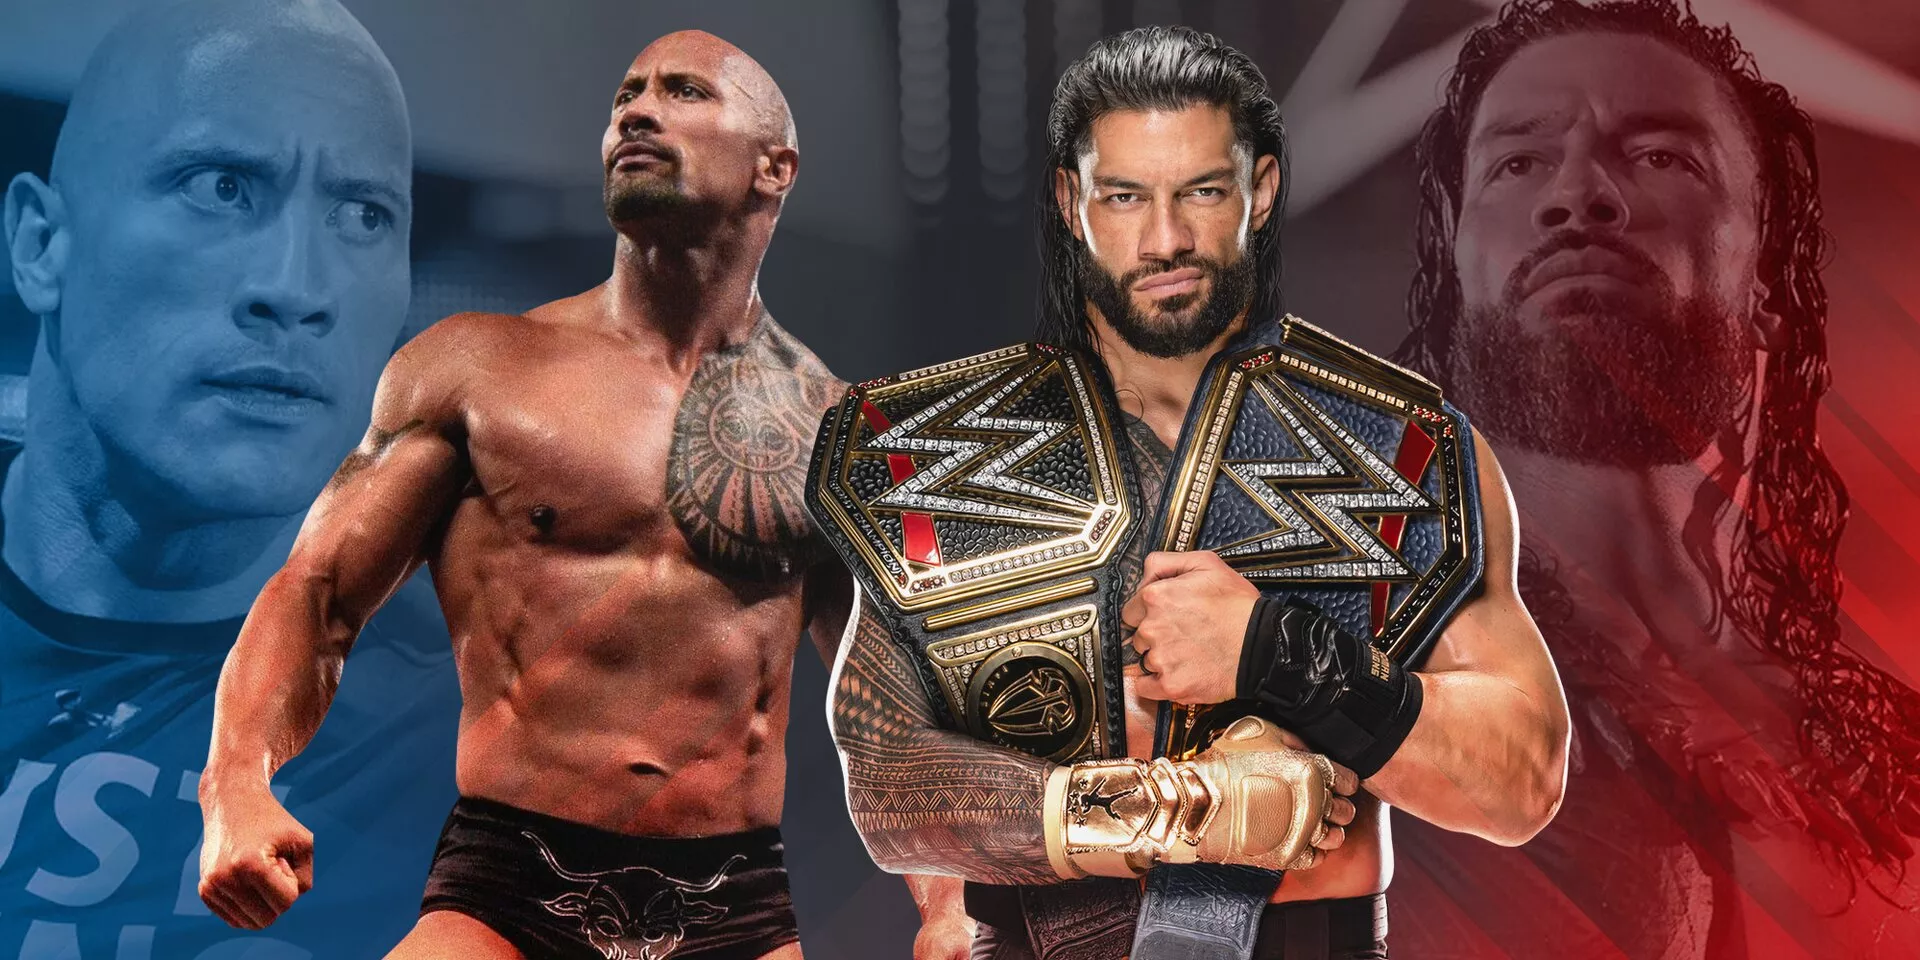 Ranking the top five best WWE wrestlers from the Samoan family tree